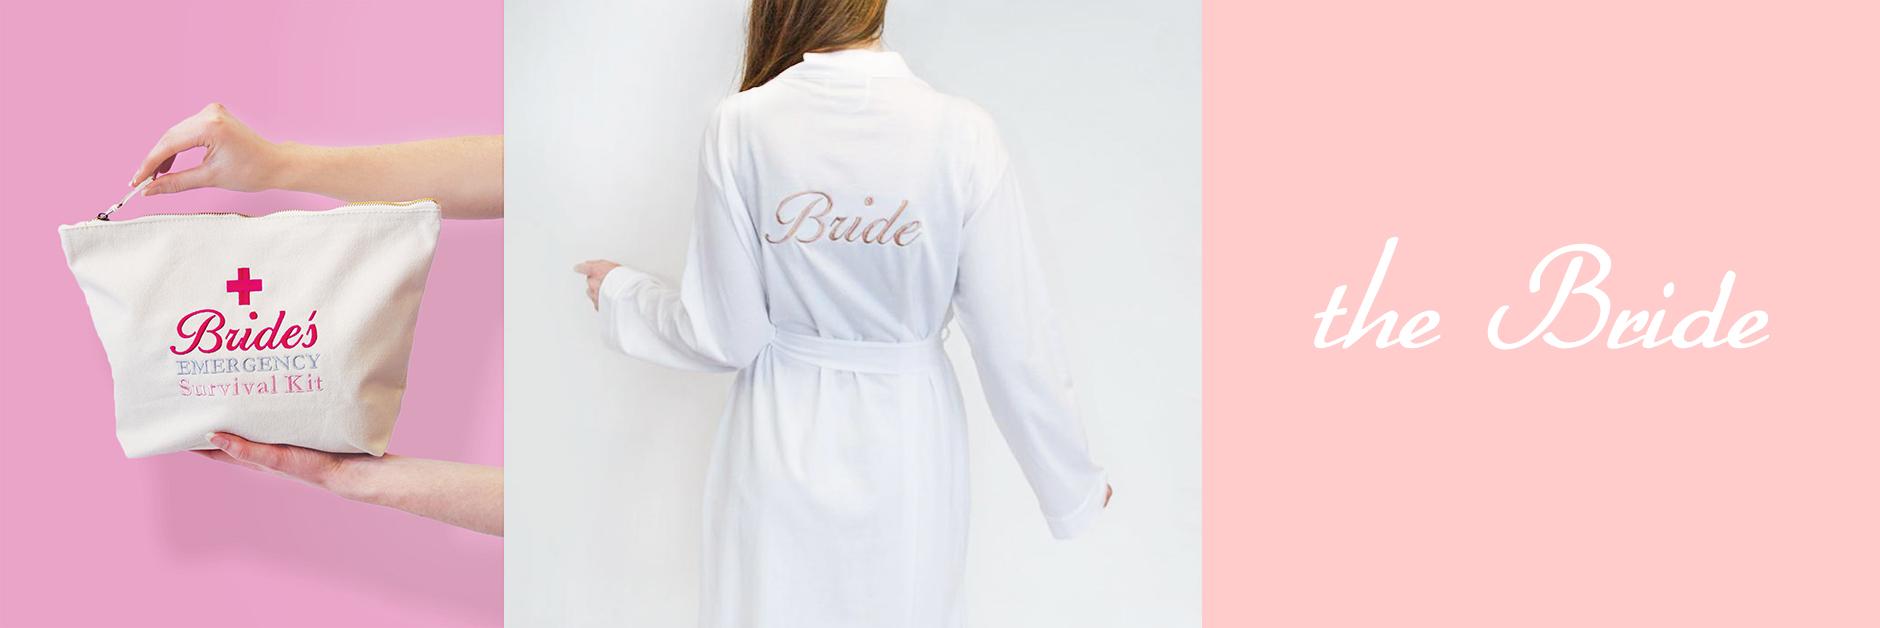 Gifts for Brides